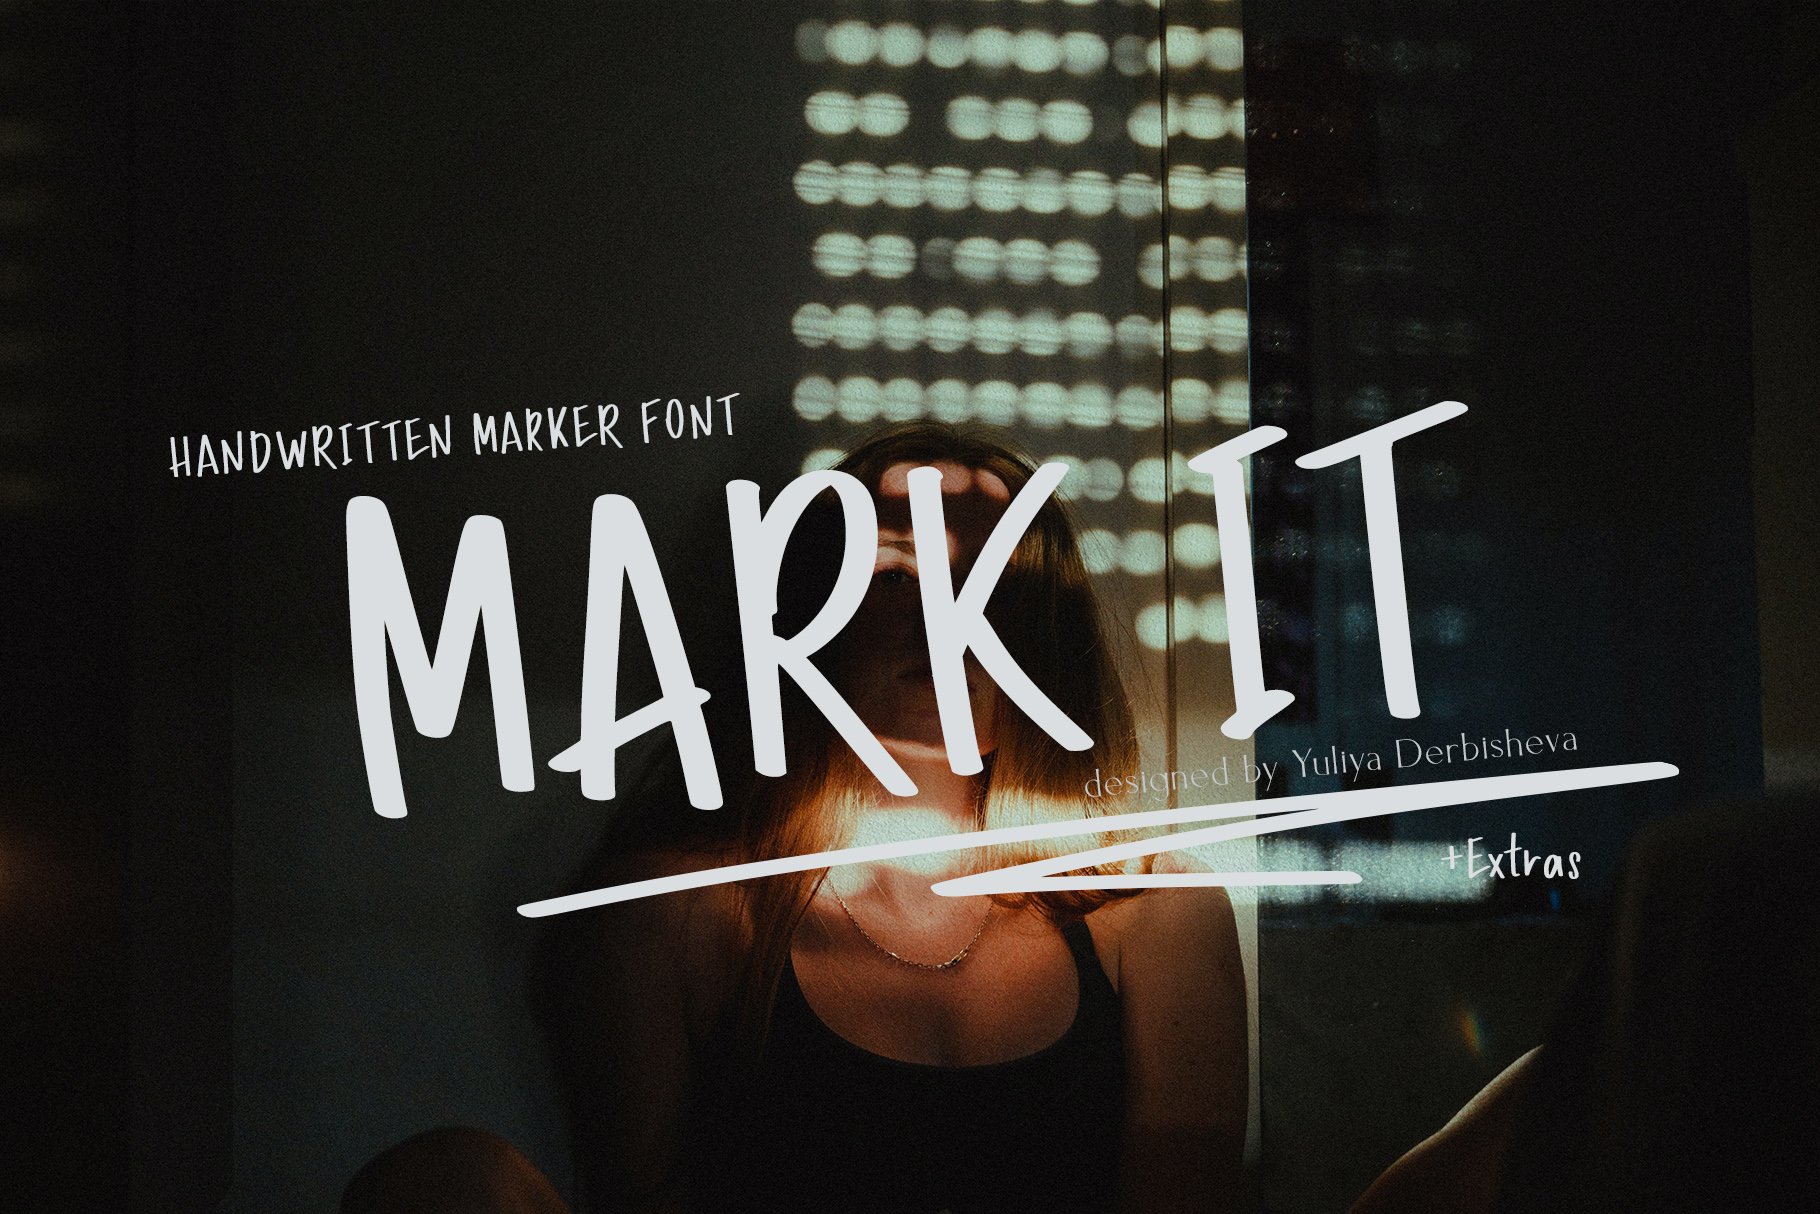 MARK IT marker typeface font cover image.